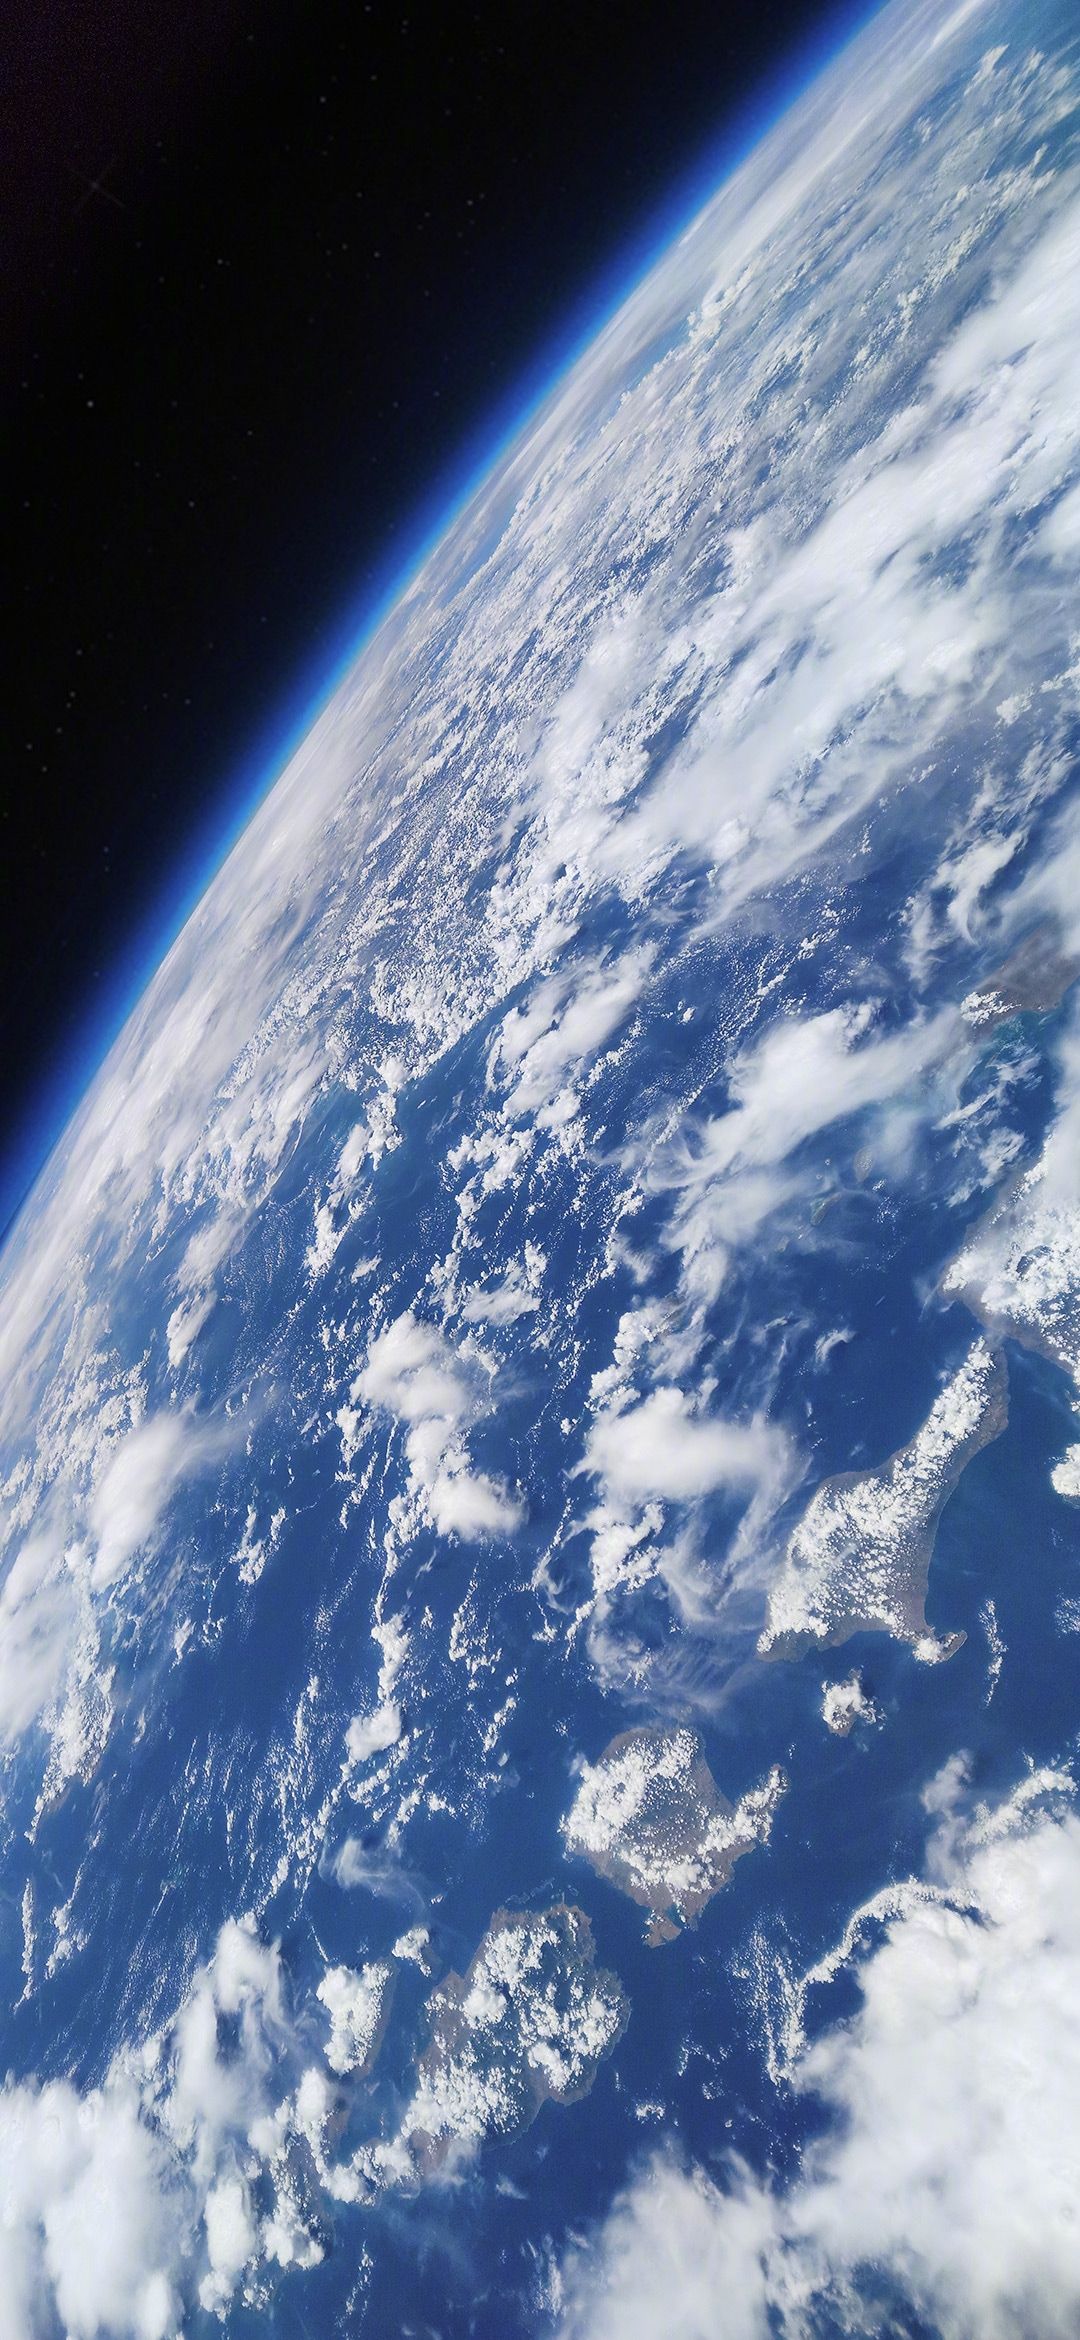 Wallpaper Sharing 丨Picture Of The Earth Taken By Xiaomi Mi 10